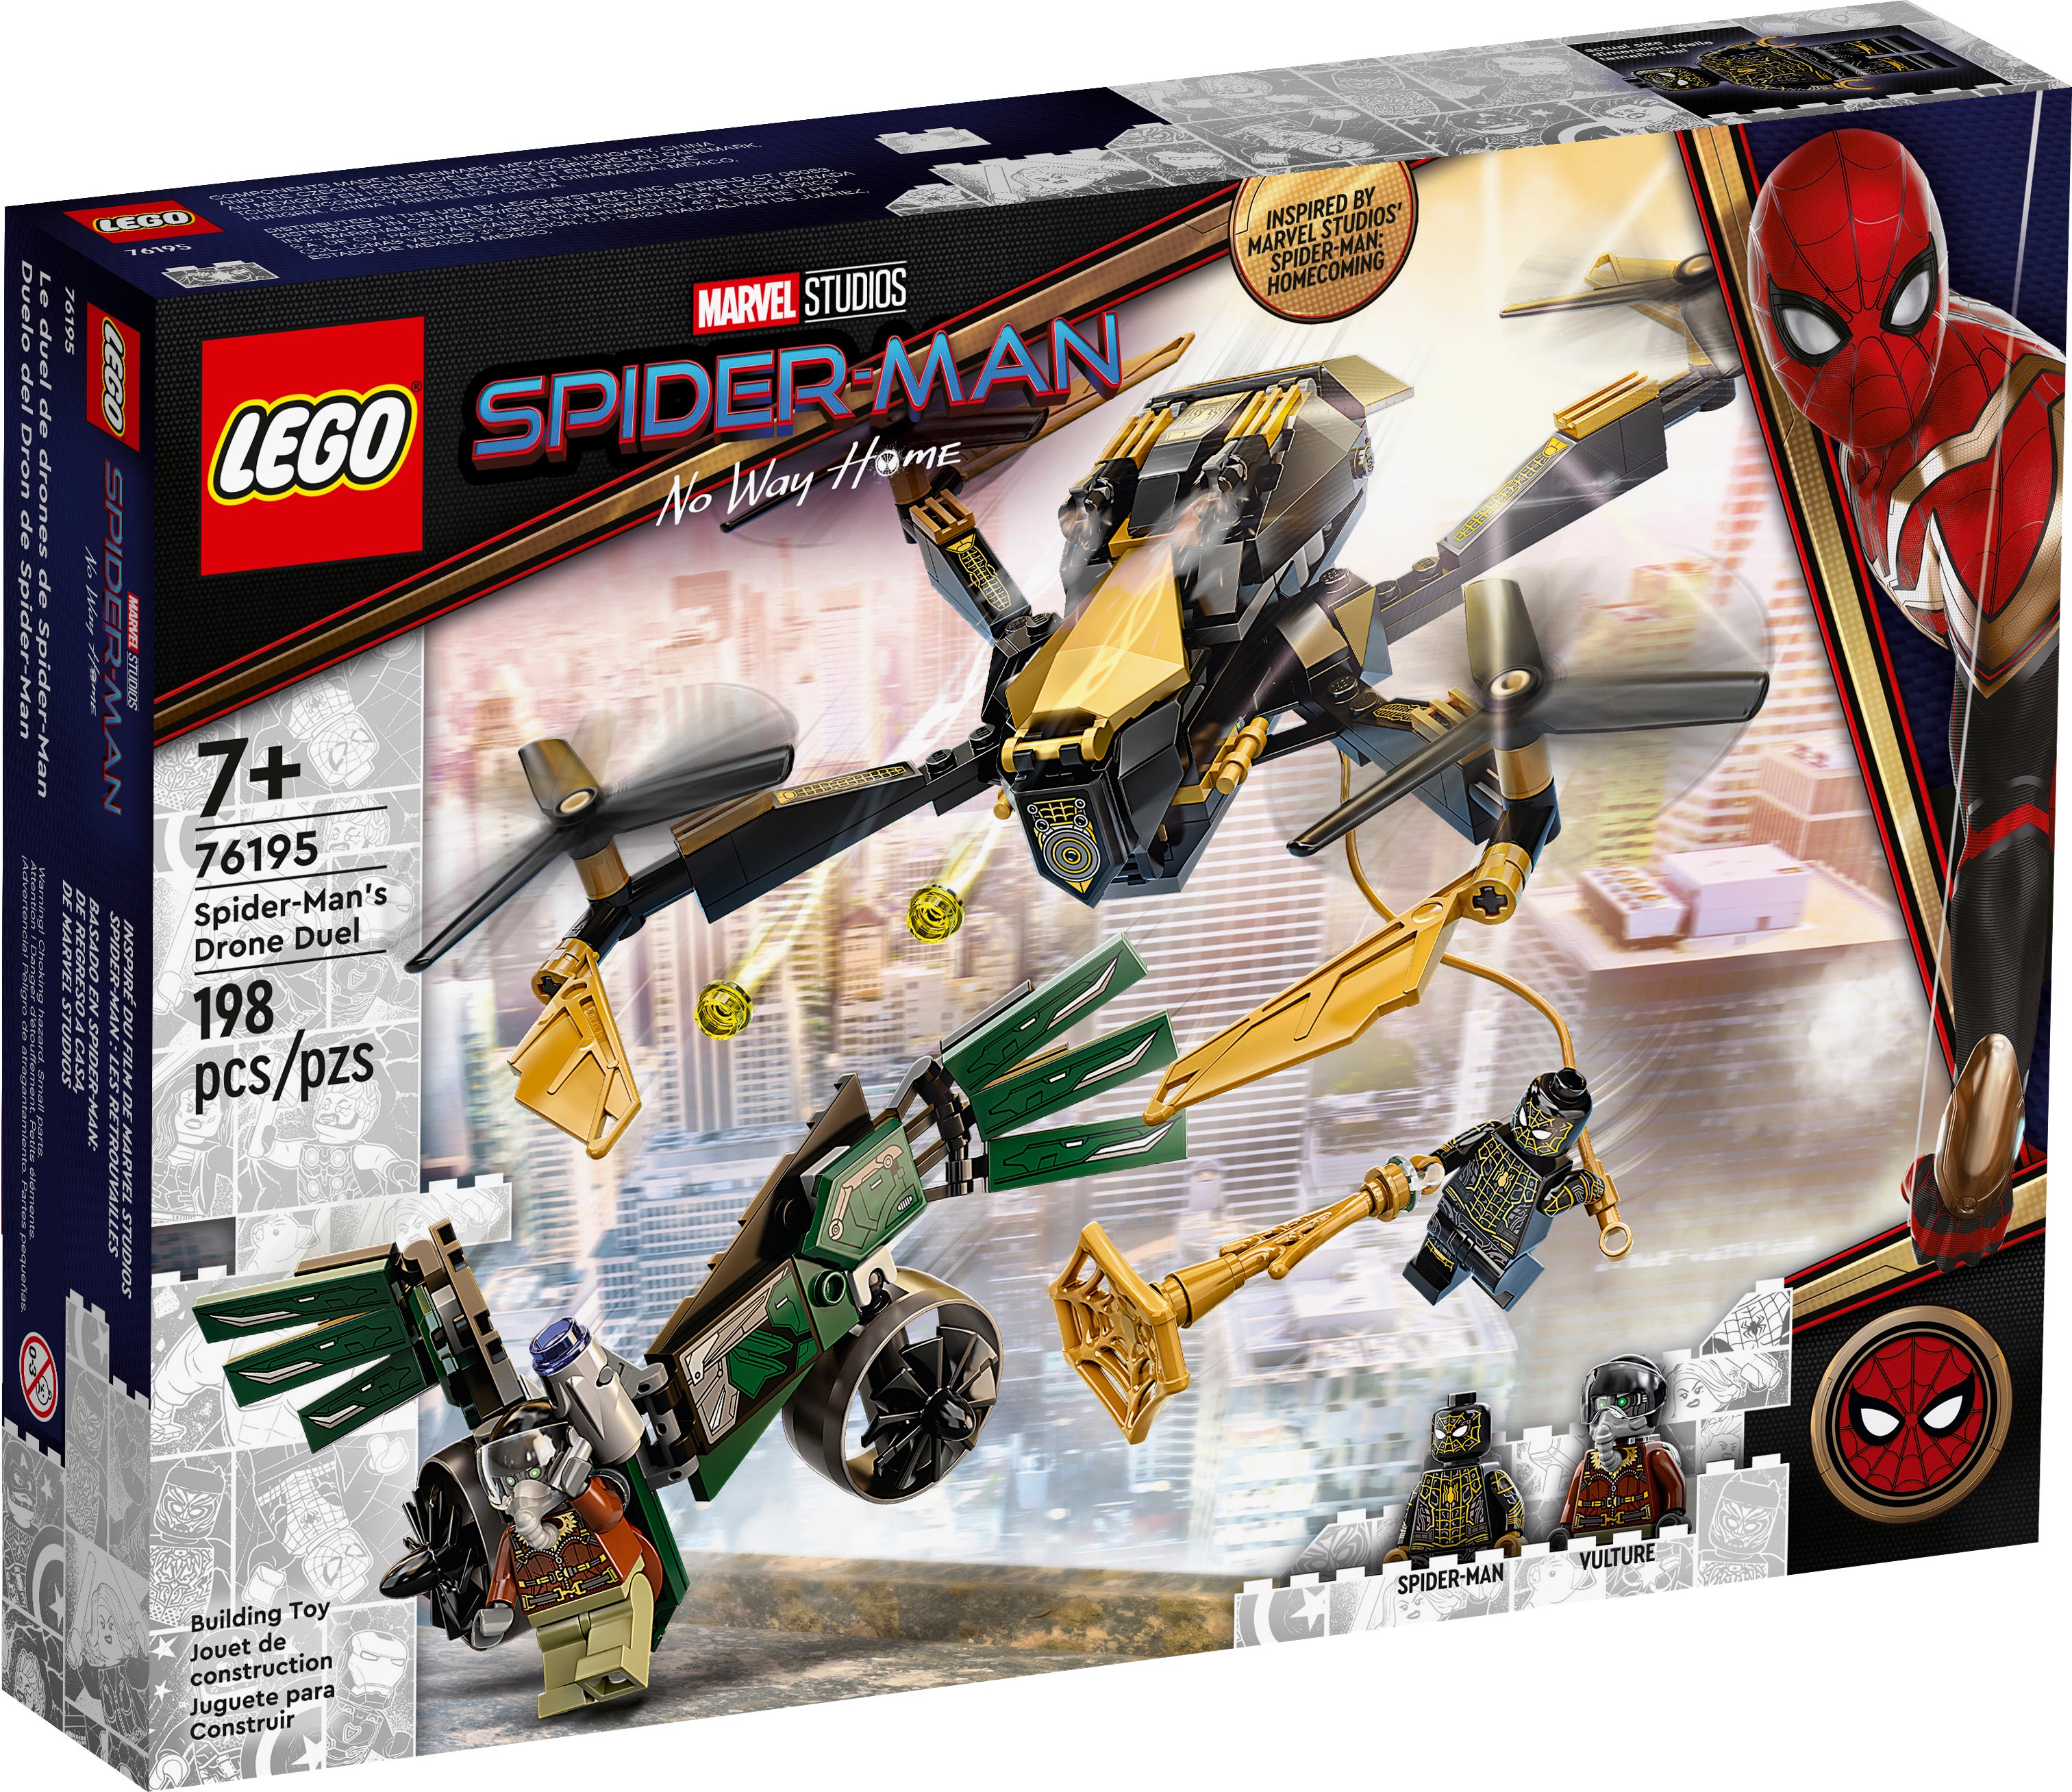 LEGO Marvel 76195 Superheroes Spider-Man’s Drone Duel Building Kit 2021 New